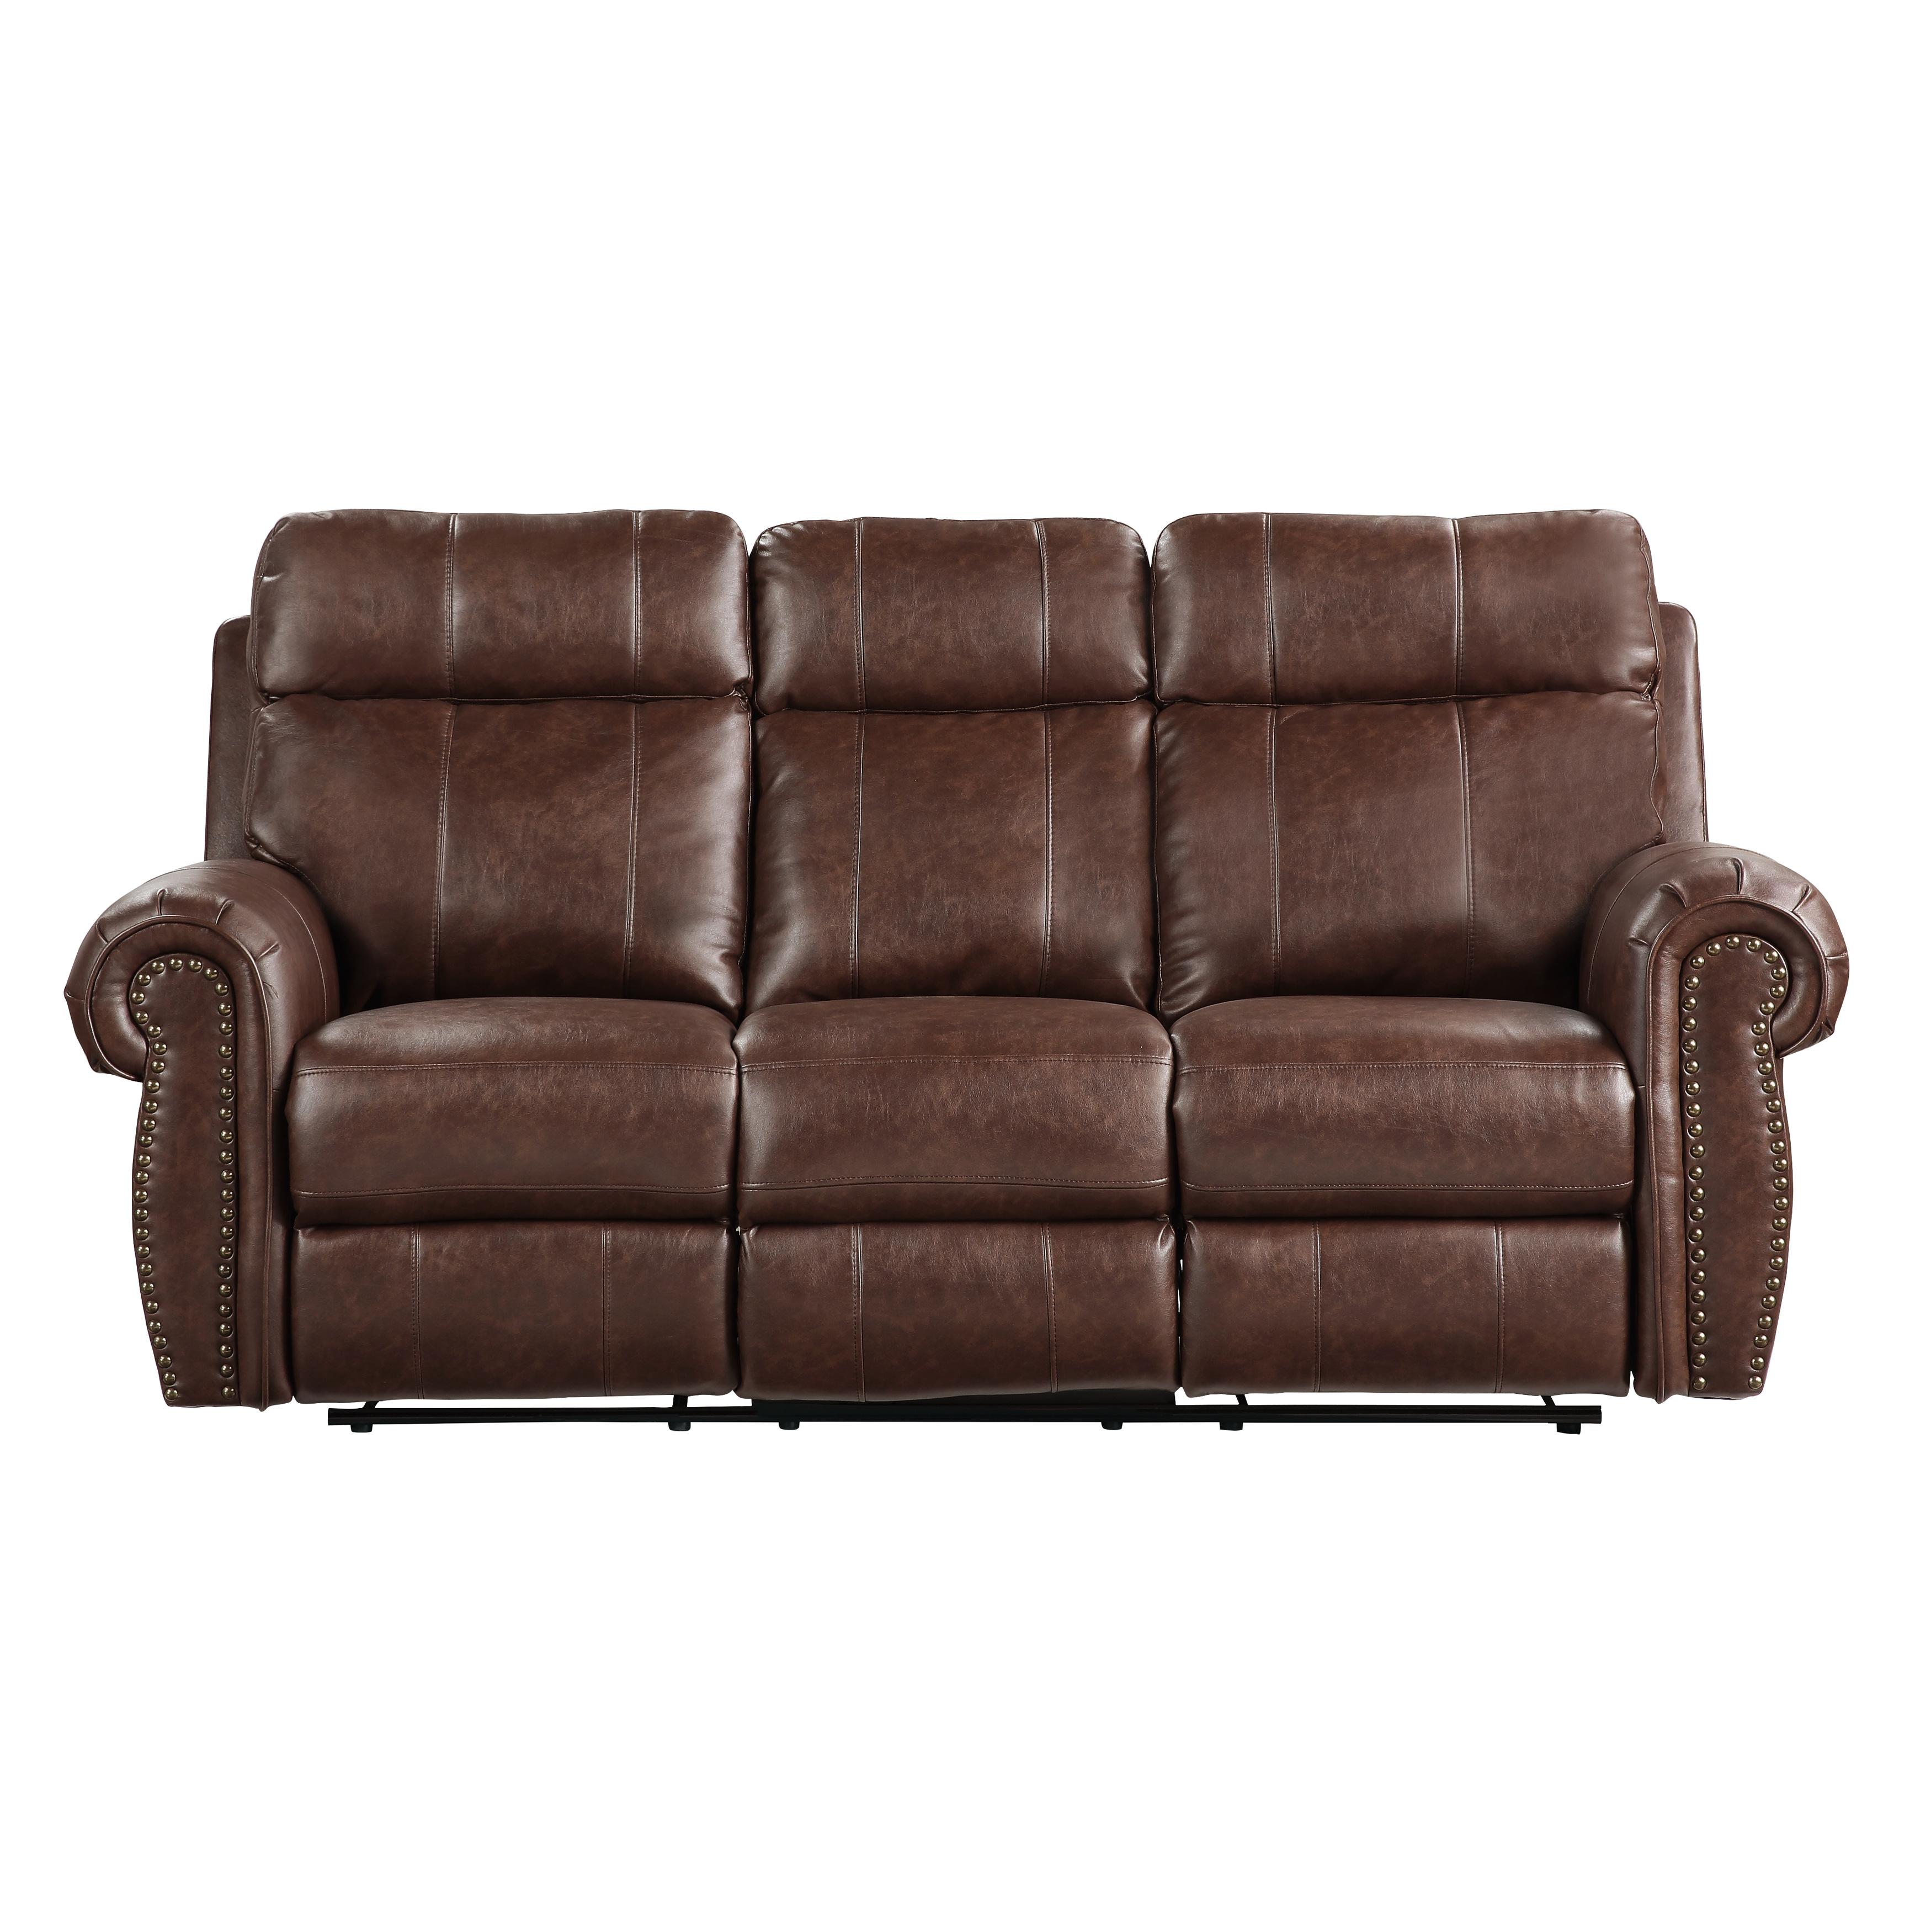 Transitional Reclining Sofa 9488BR-3 Granville 9488BR-3 in Brown Microfiber